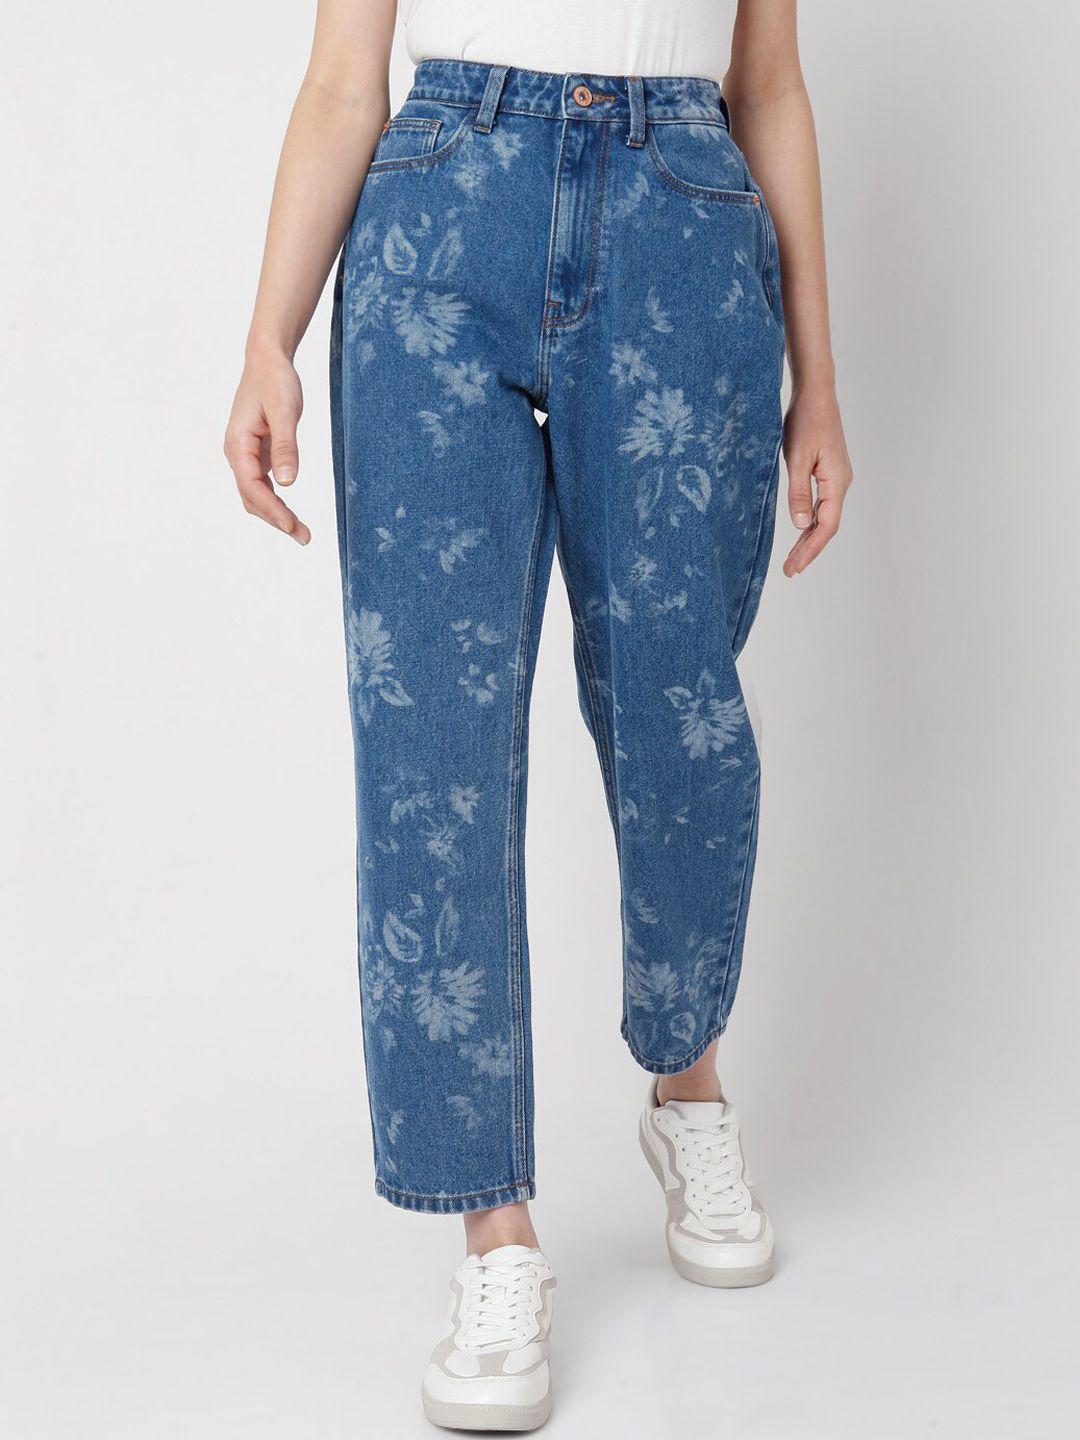 vero moda women blue high-rise highly distressed jeans